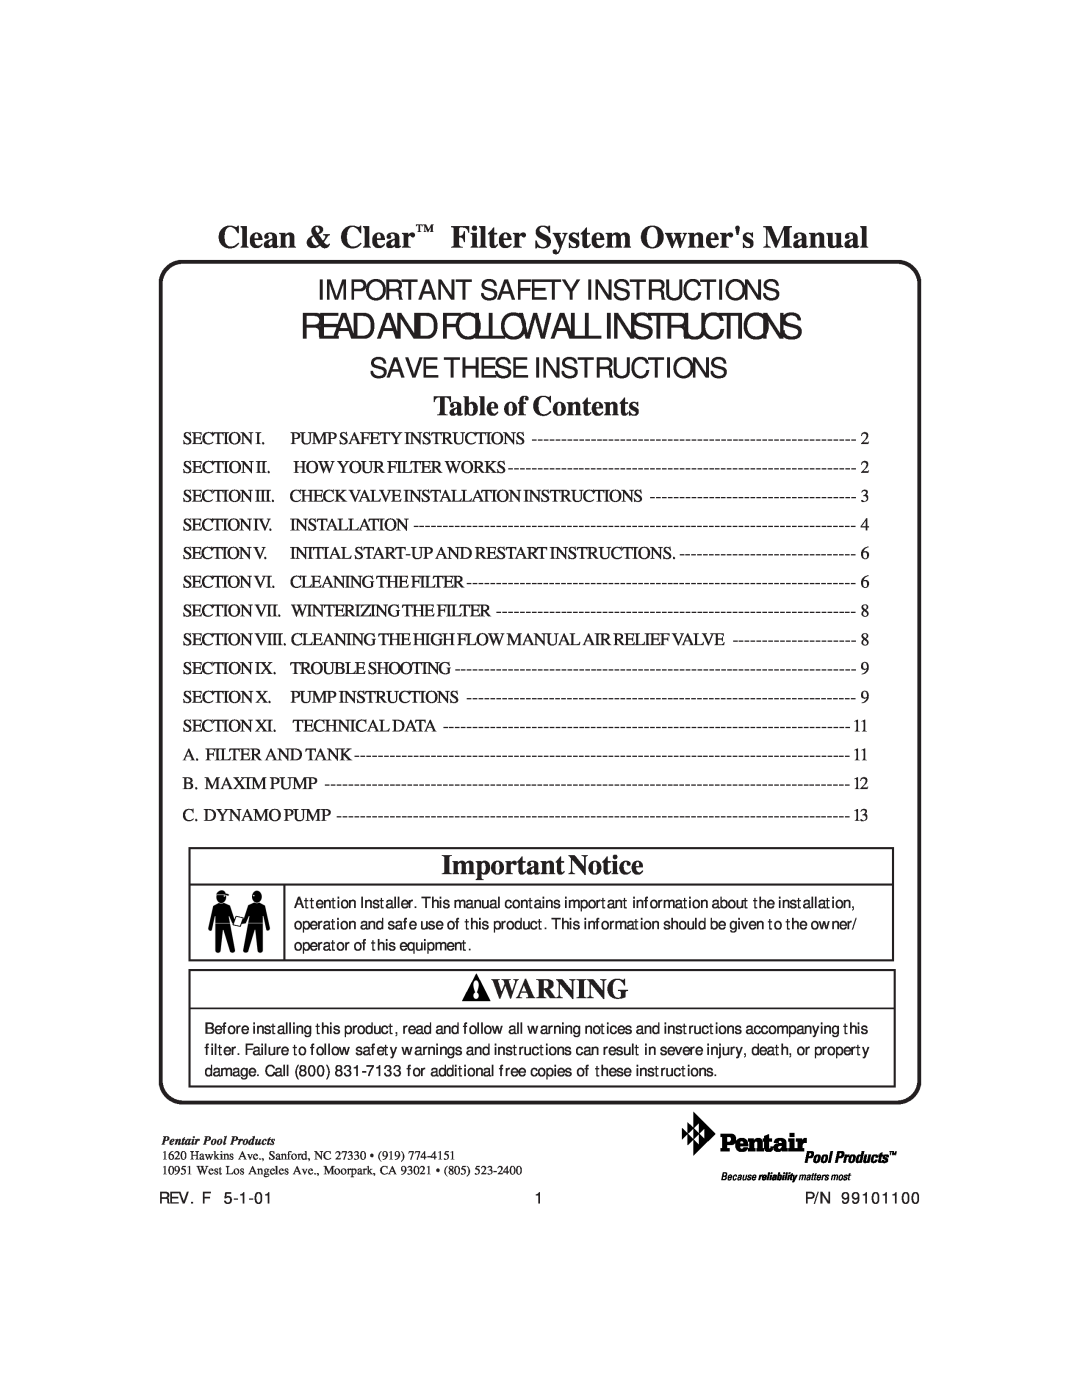 System Works 99101100 manual Clean & Clear Filter System Owners Manual, Table of Contents, Important Notice 